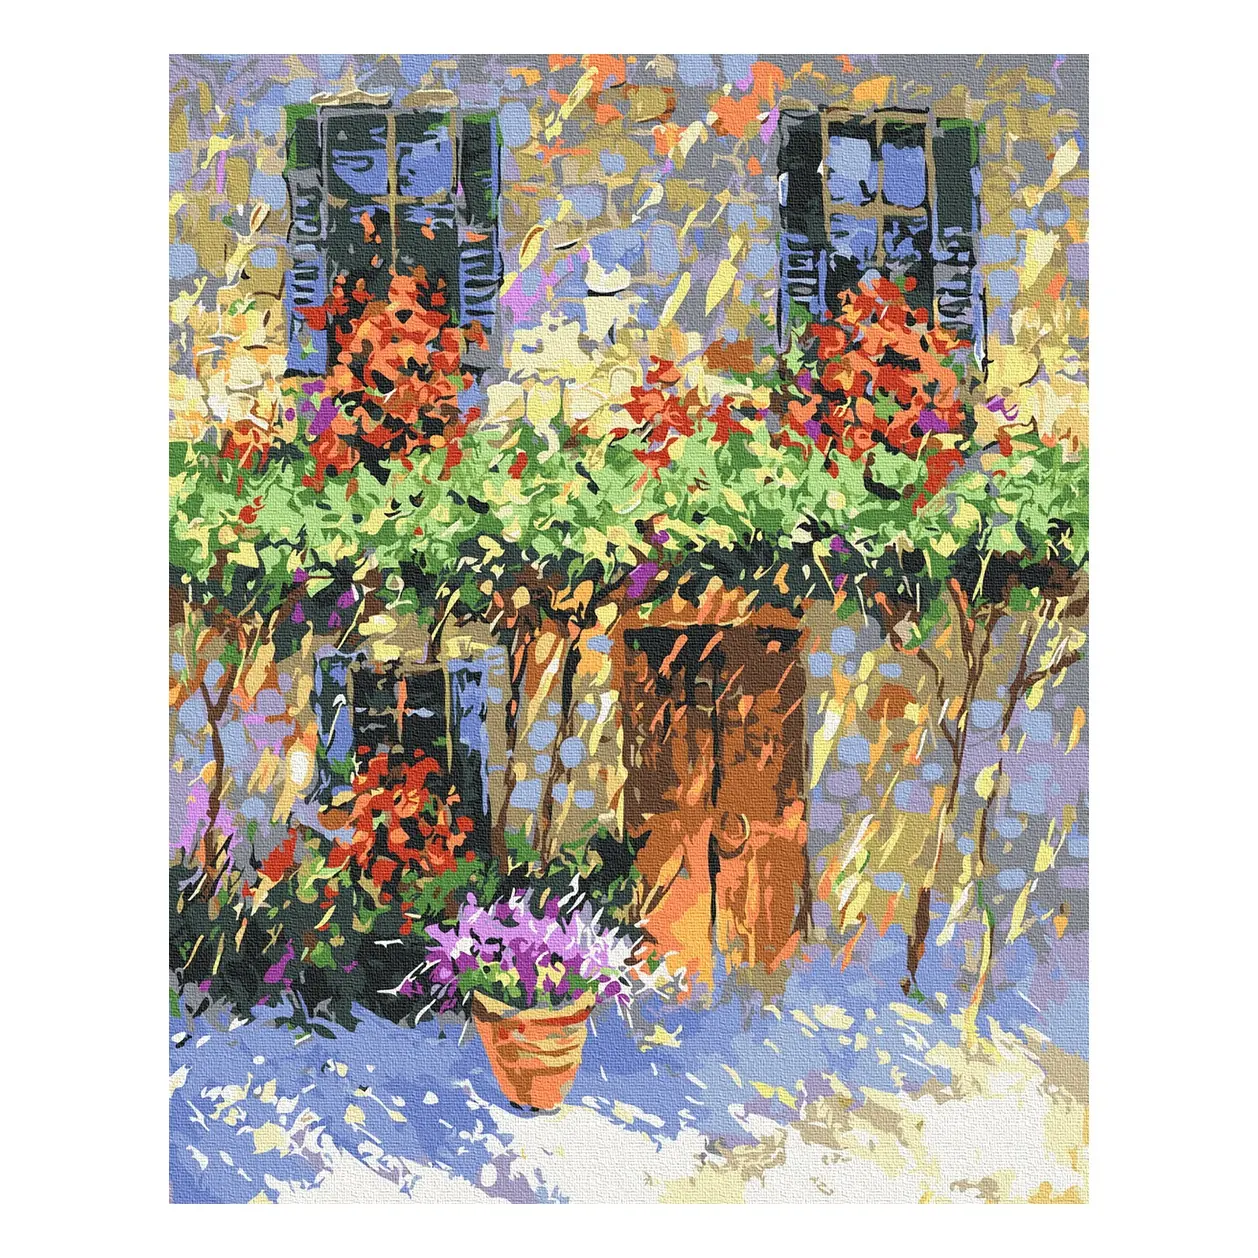 paint boy GX3017 Sunny flower house landscape mural 40 * 50 diy painting by numbers art decoration oil painting